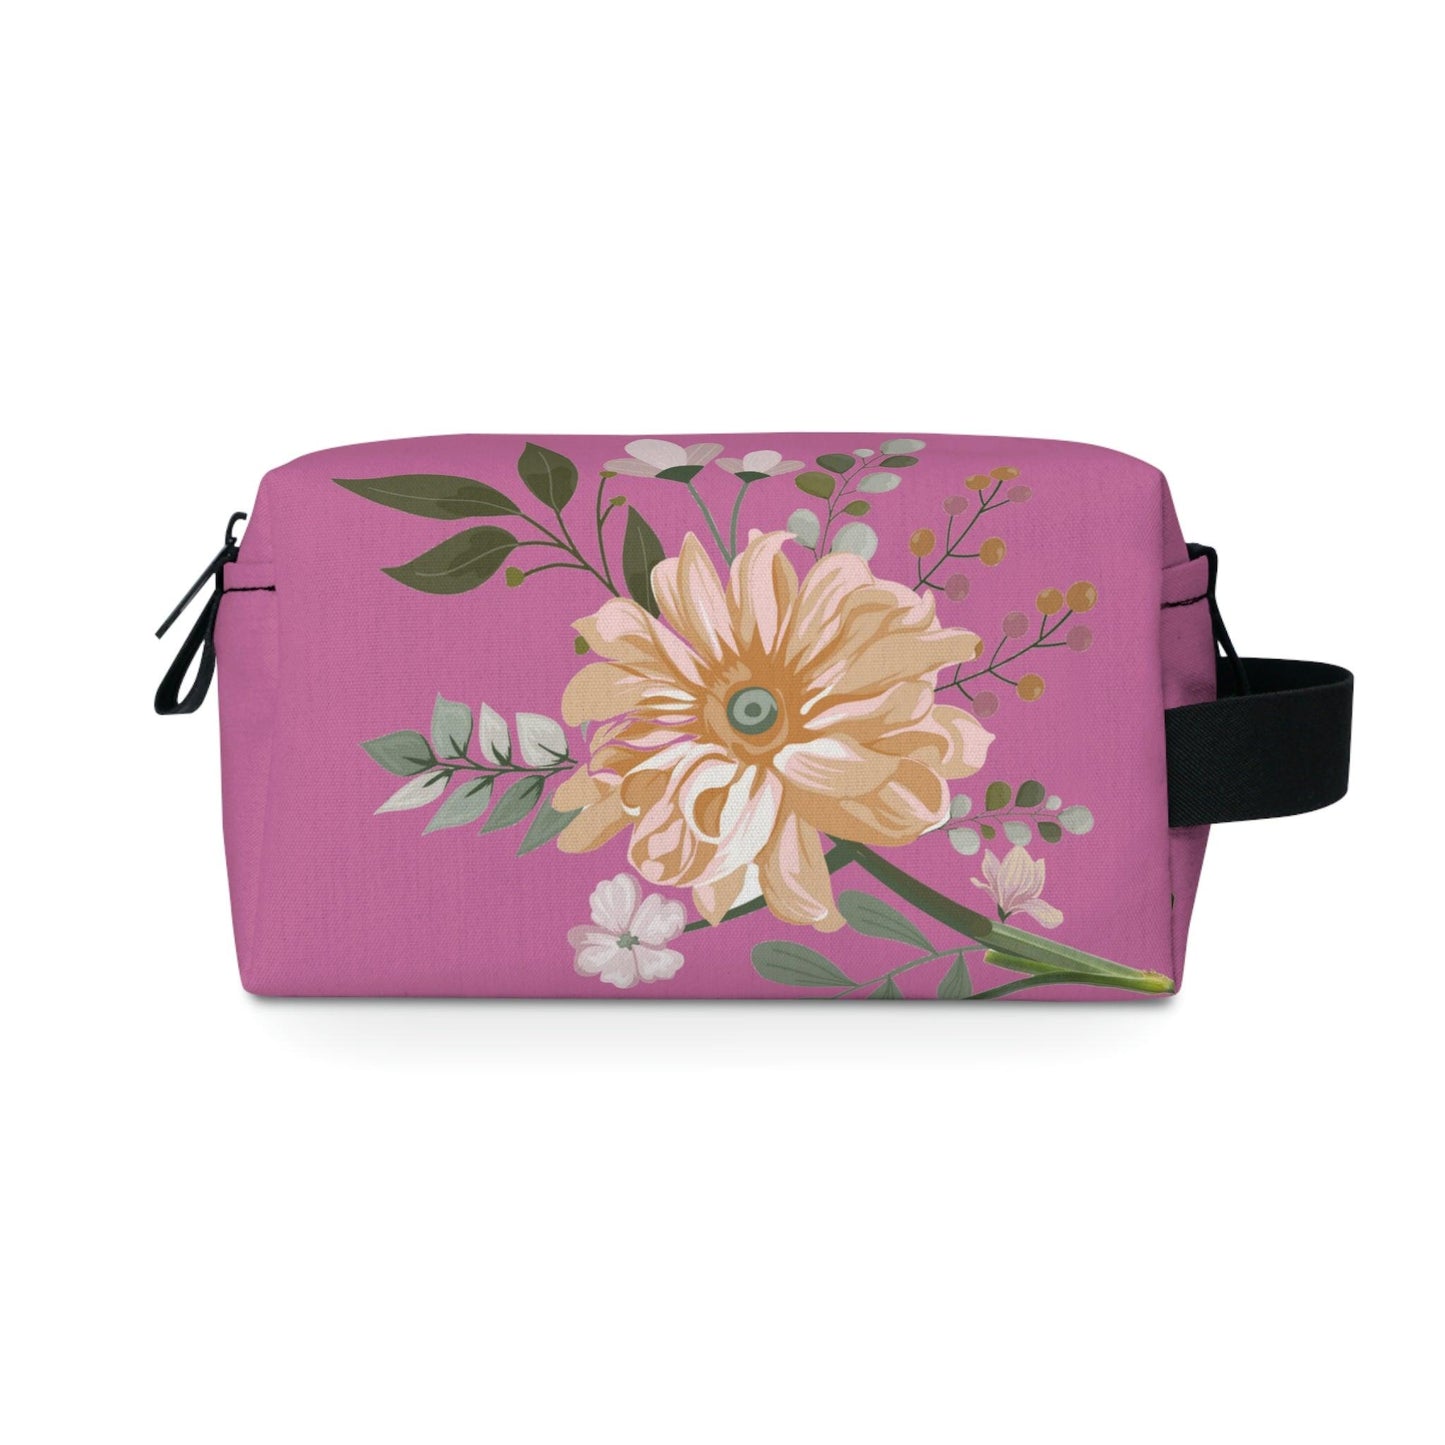 Makeup Bags Cosmetic Bag | Floral Makeup Bag - floral Toiletry Bag | makeup pouch gift for her | bridal party bags | travel bag - Giftsmojo